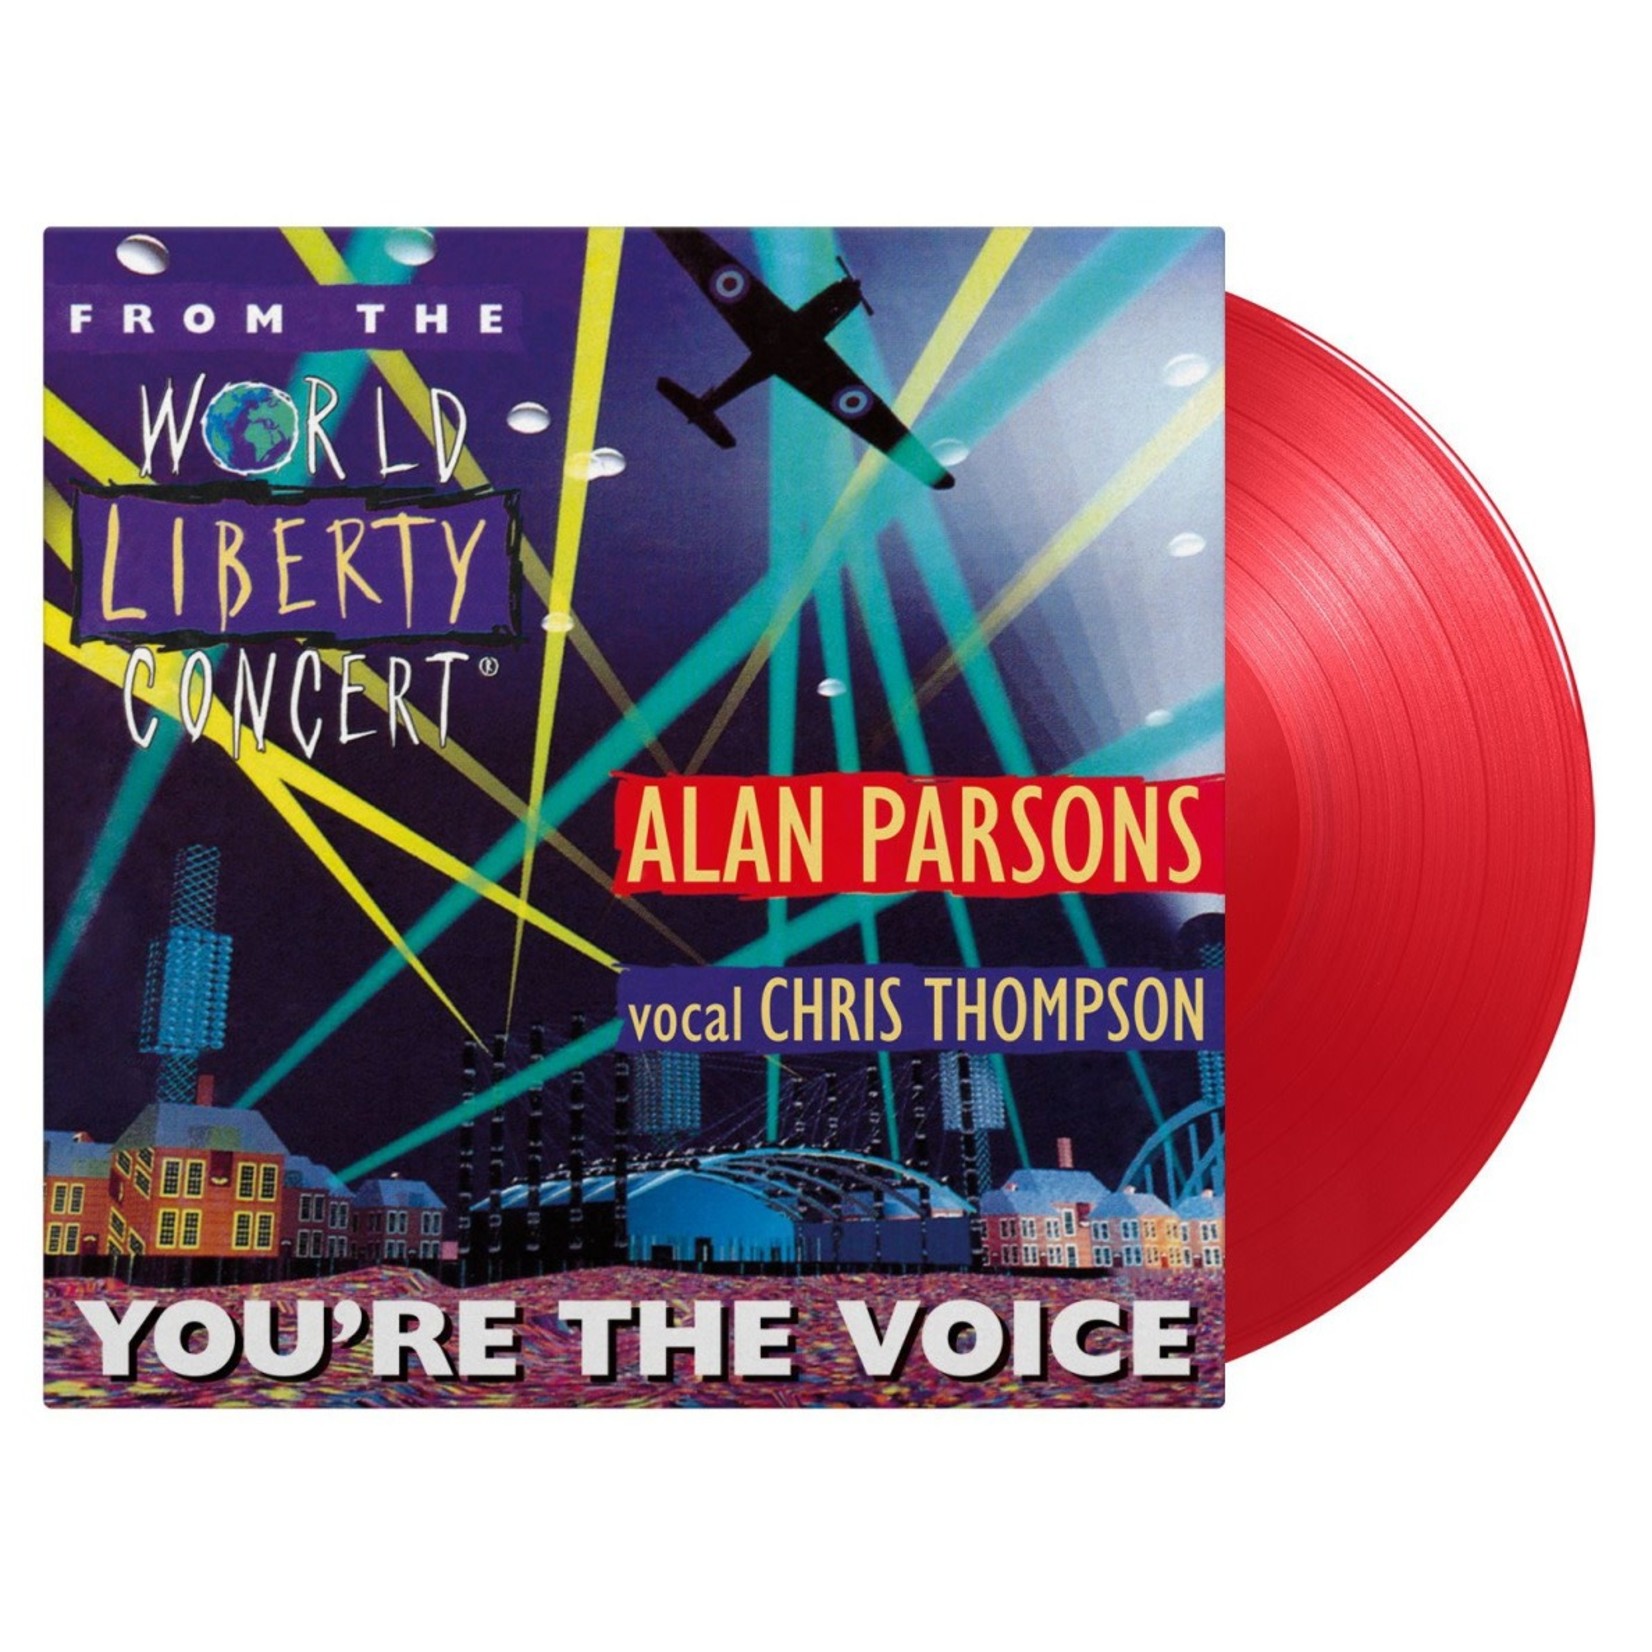 Alan Parsons/Chris Thompson - You're The Voice (Clear/Red Vinyl) (MOV) [7"] (RSD2023)